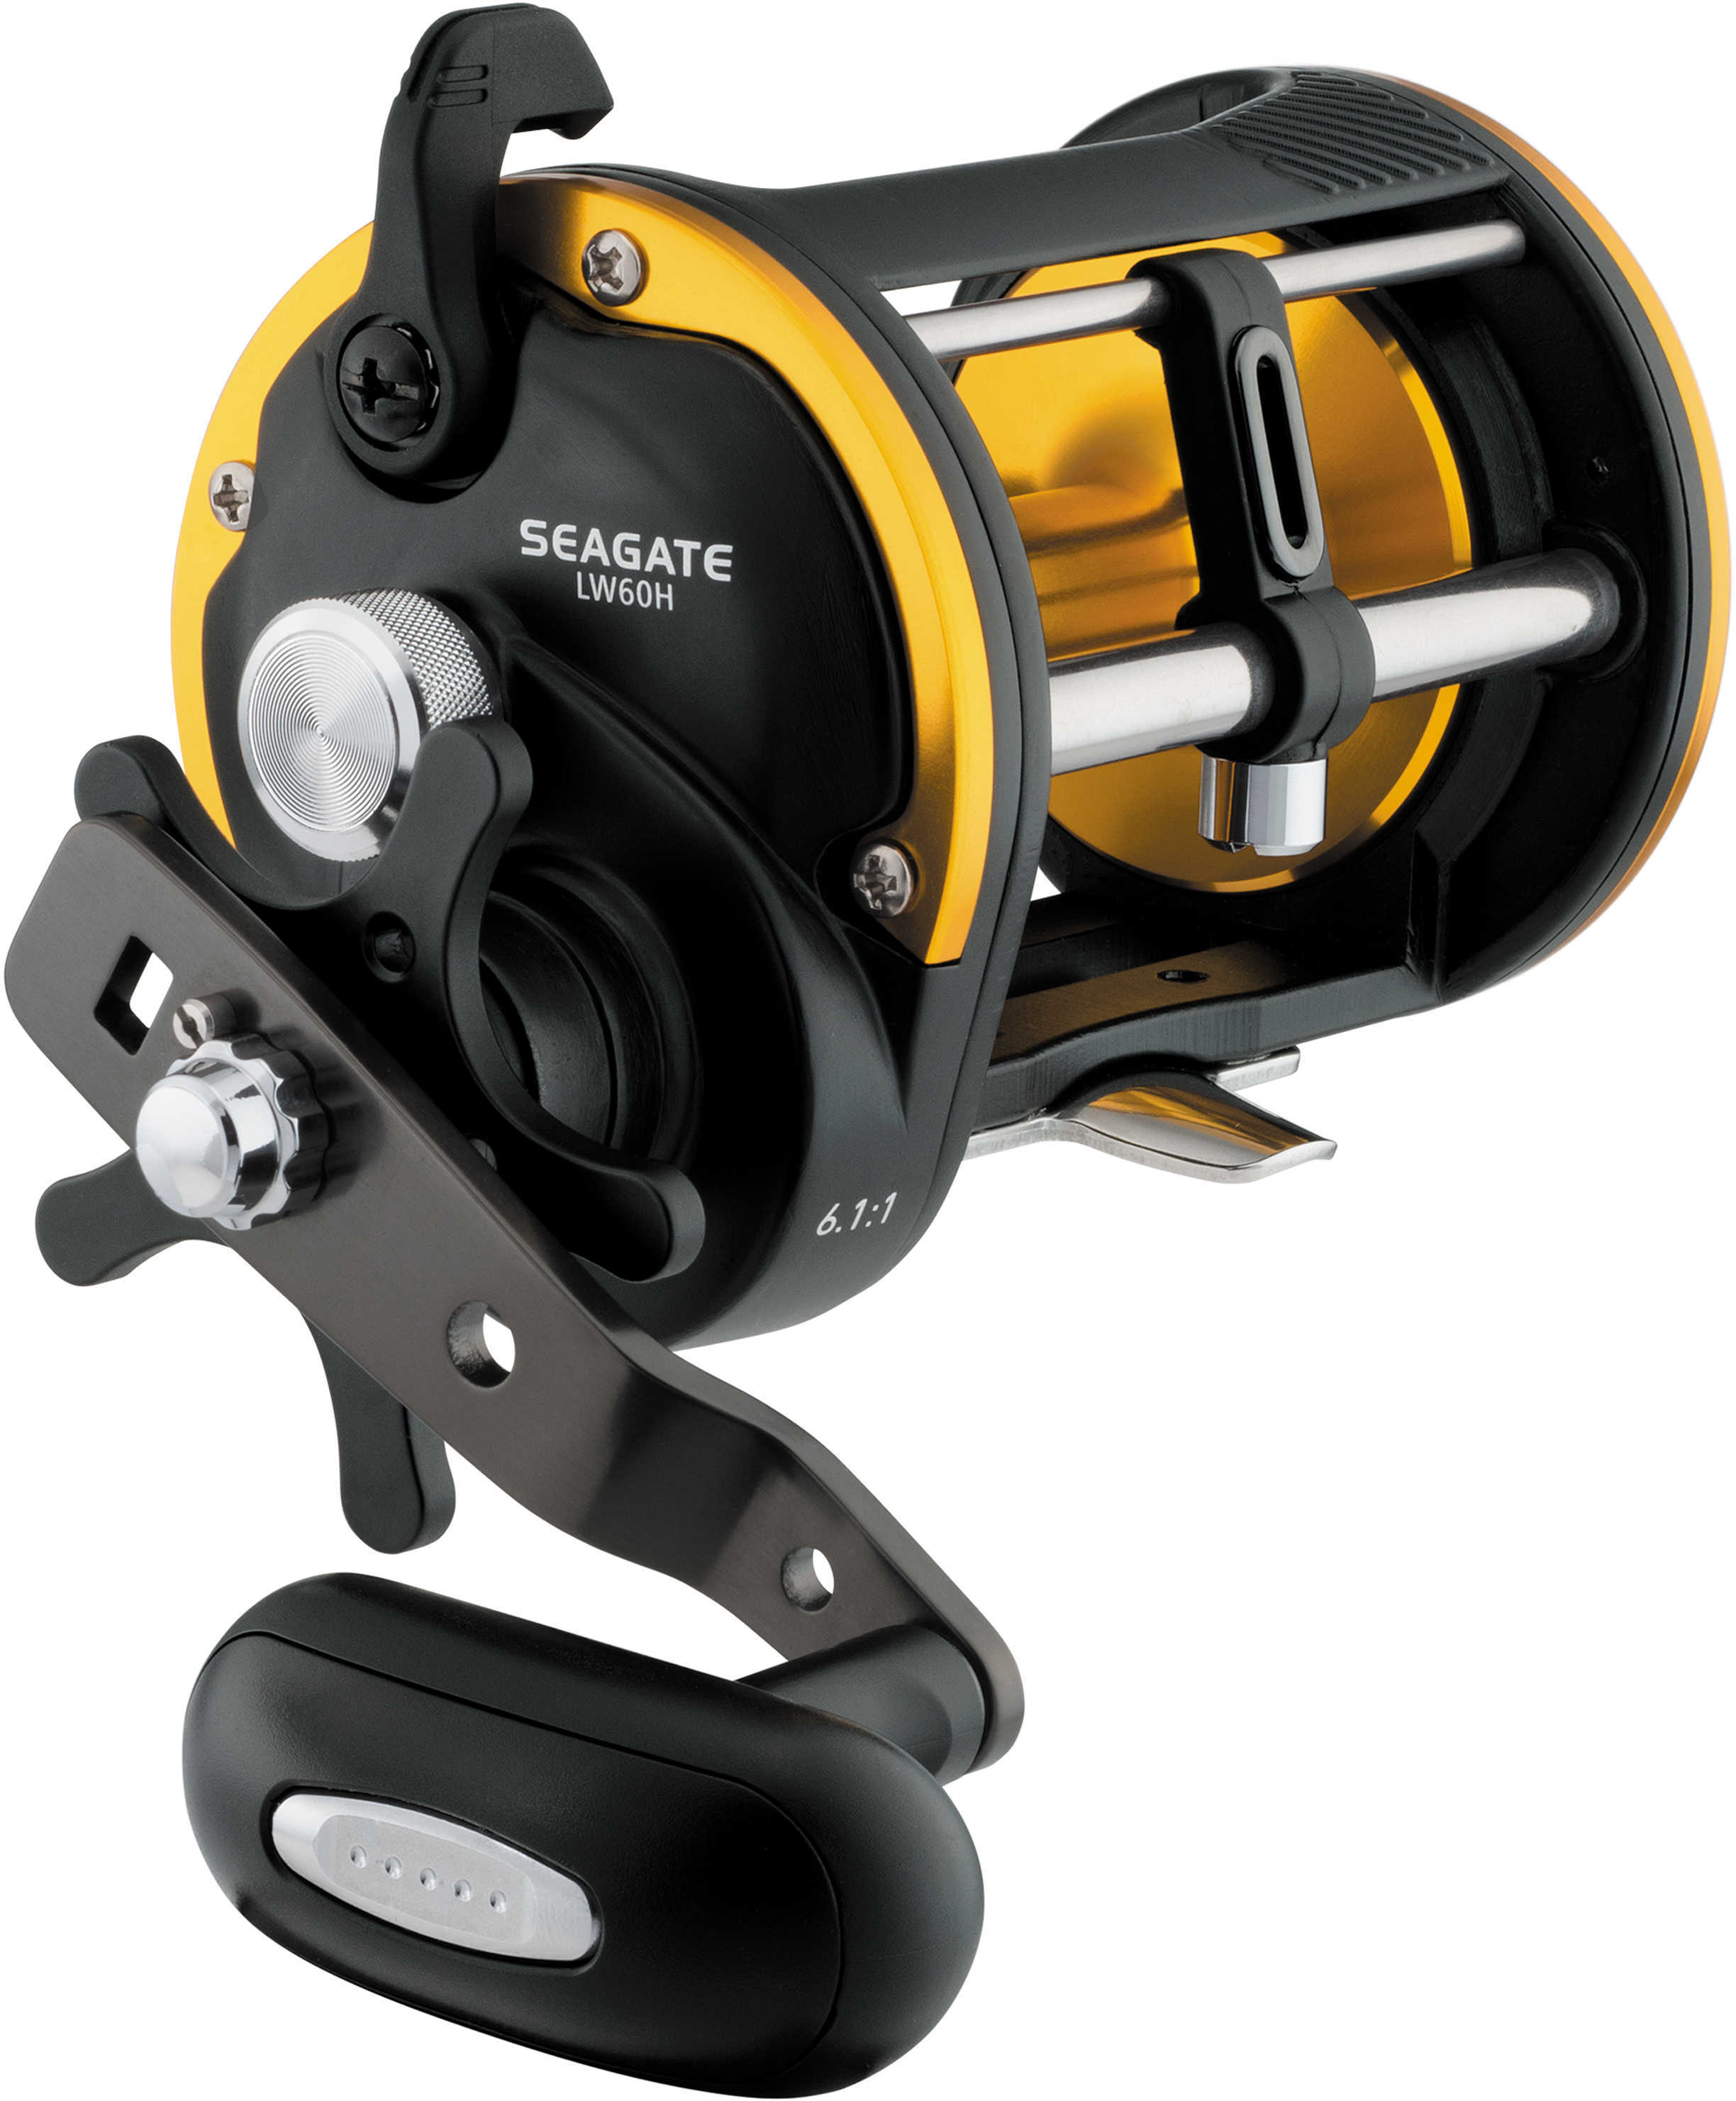 Daiwa Seagate Levelwind Saltwater Conventional Reel 60 6.1:1 Ratio 1CRBB 2BB 1RB Bearings Right Hand